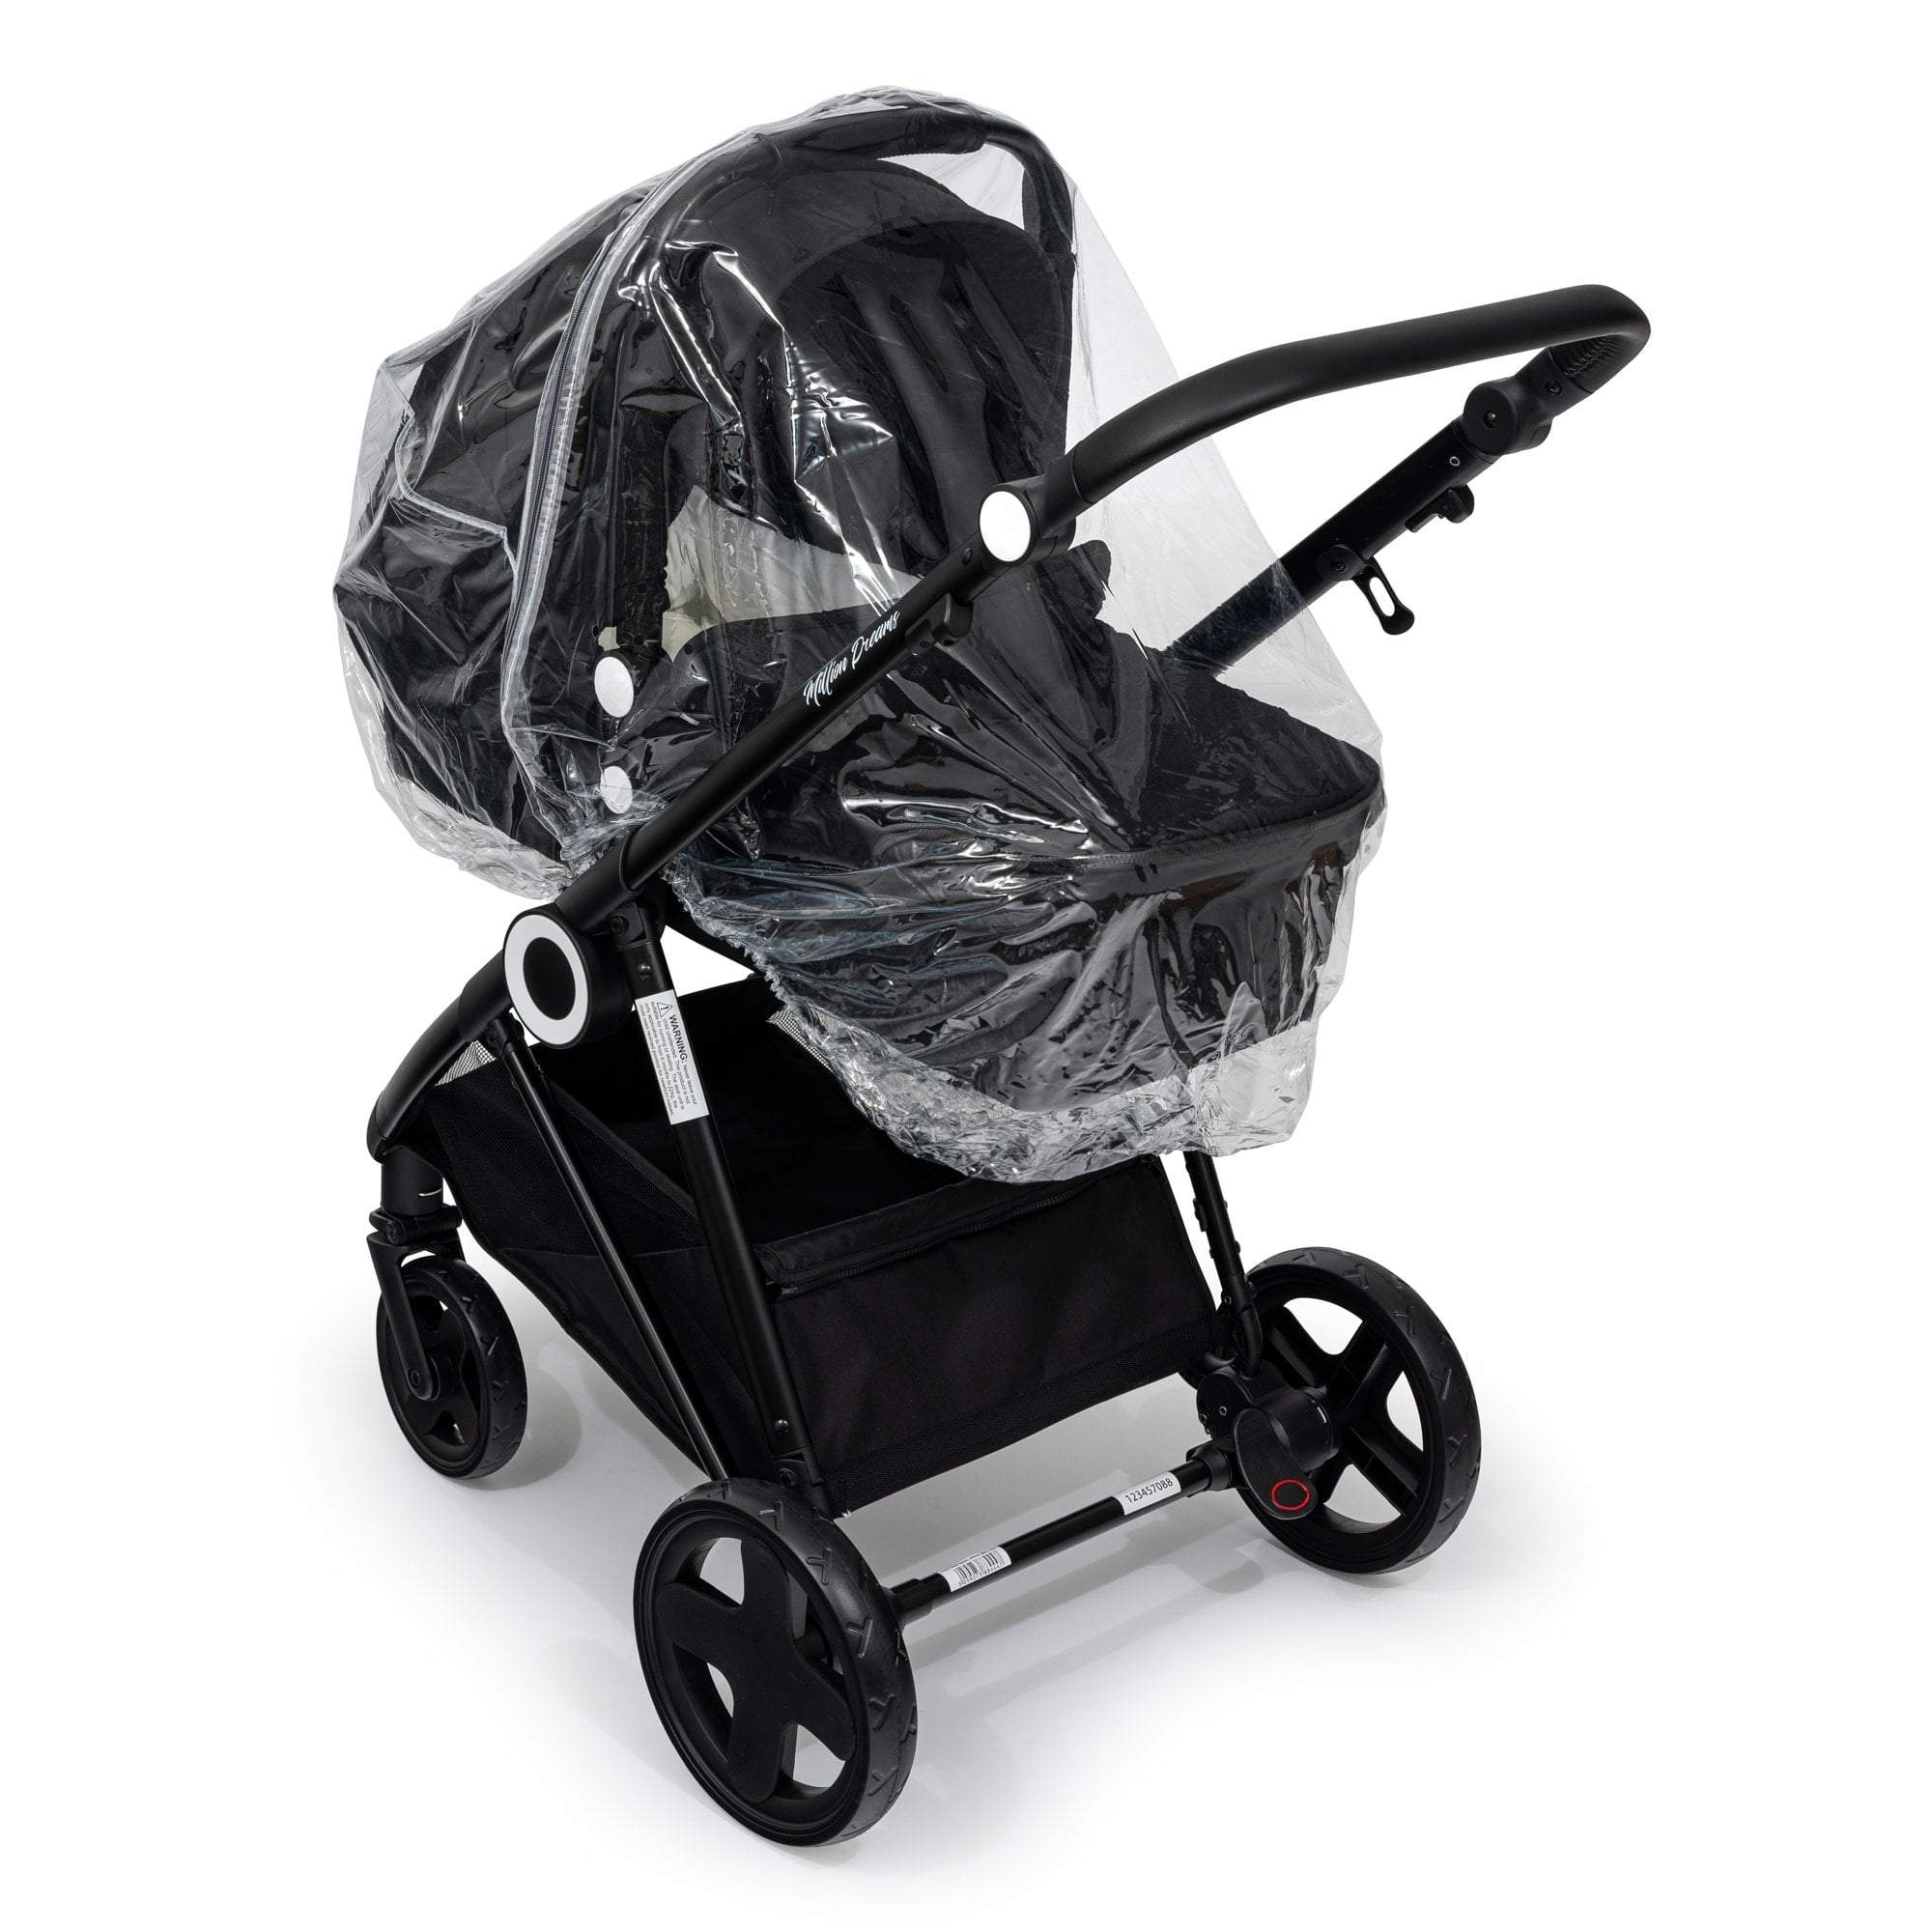 Carrycot Raincover Compatible With Maxi Cosi - Fits All Models - For Your Little One